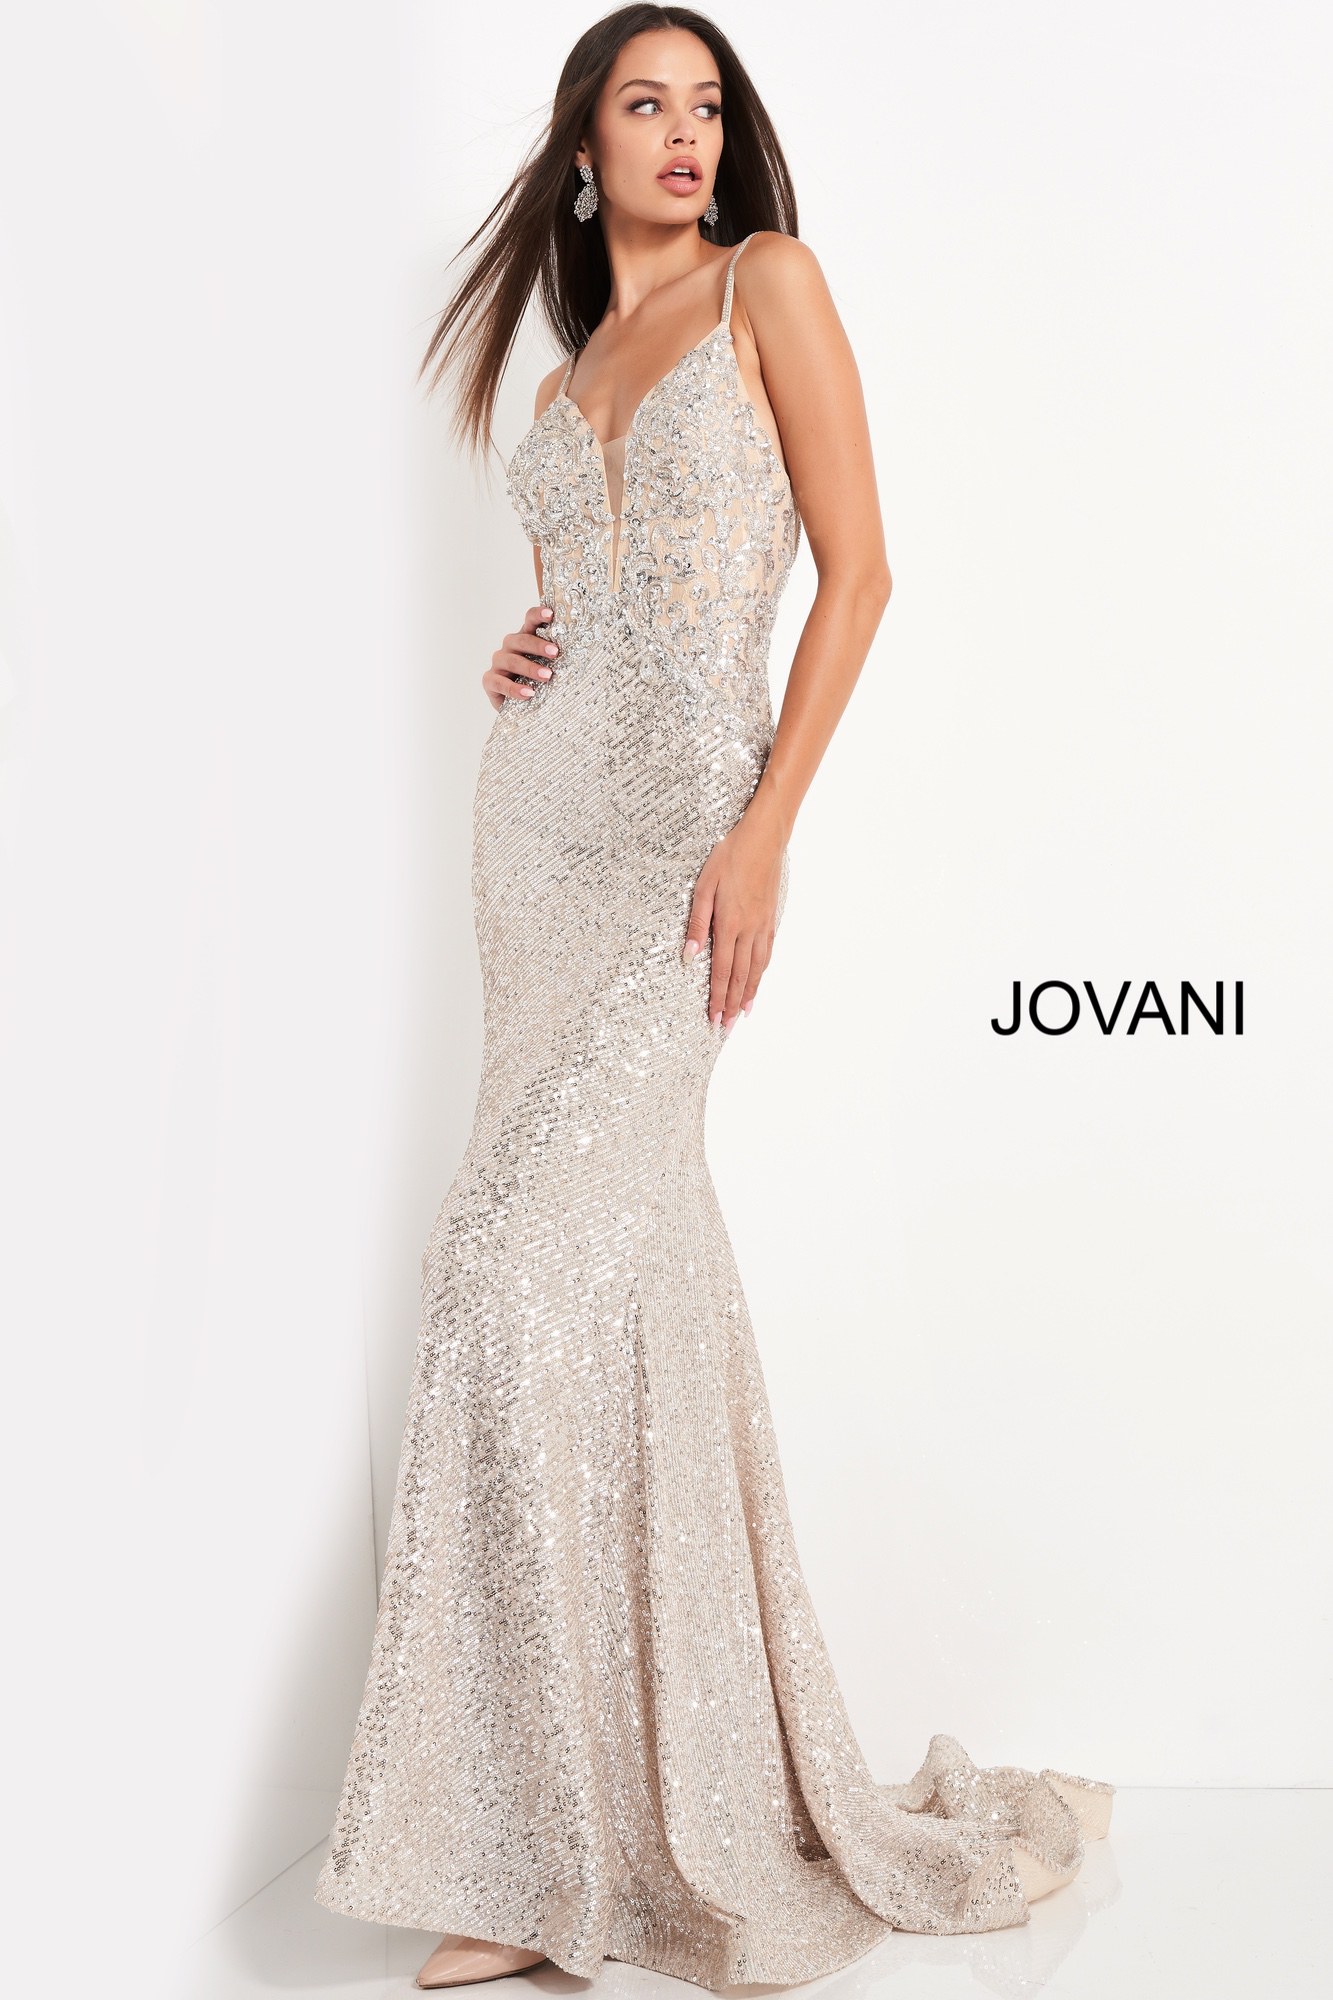 Jovani 05805 | Silver Sequin Skirt Embroidered Bodice Prom Dress